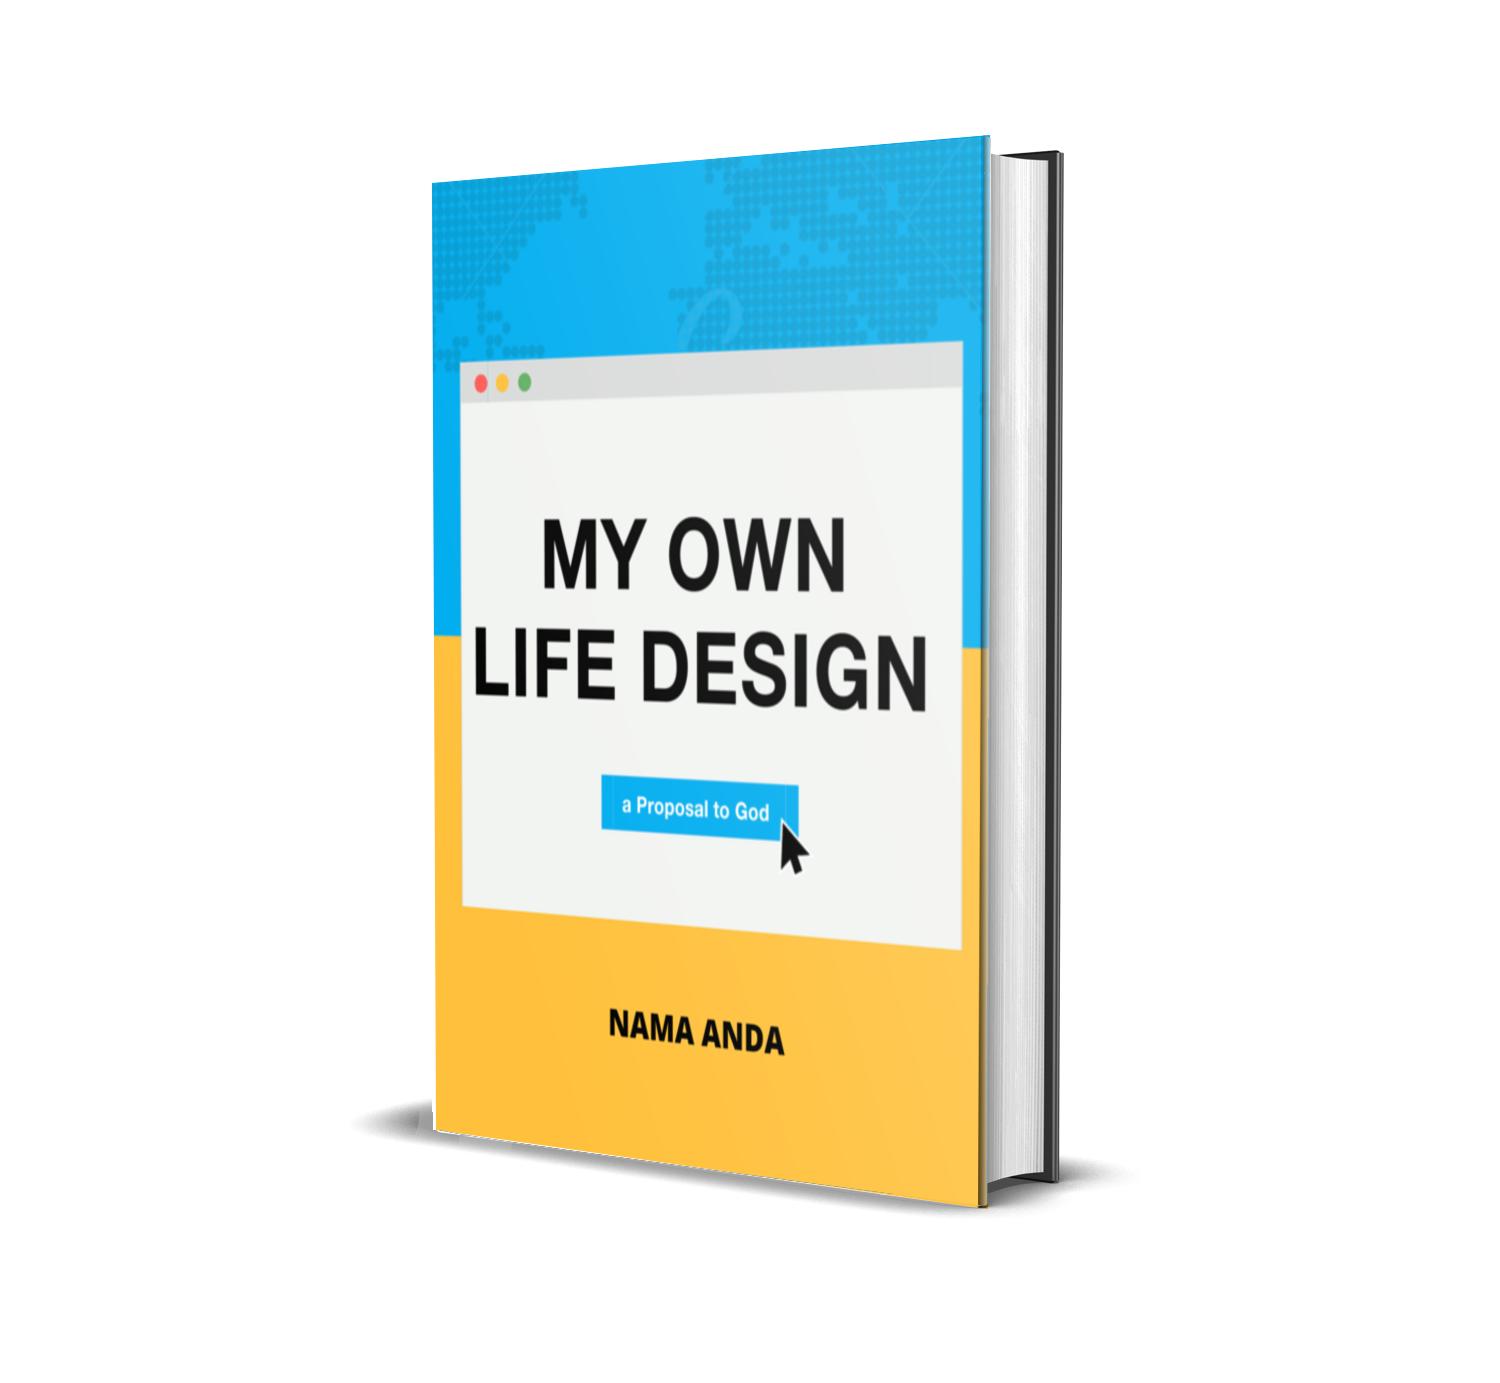 My Own Life Design - a Proposal to God